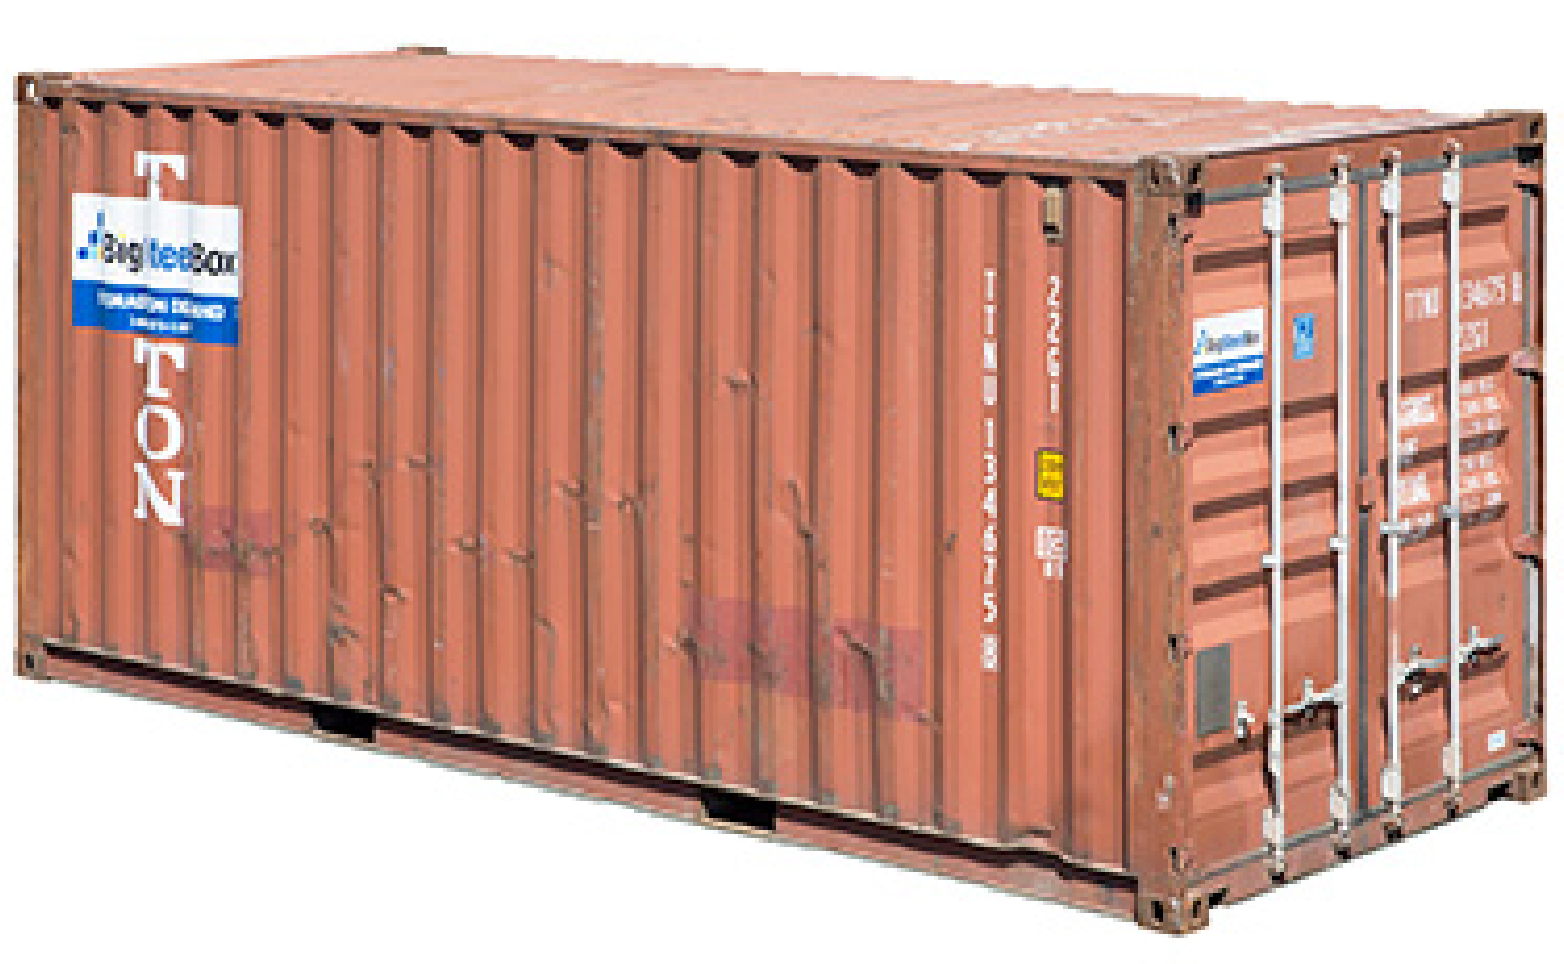 Sea Can, C Can, Storage Bin or Shipping Container?